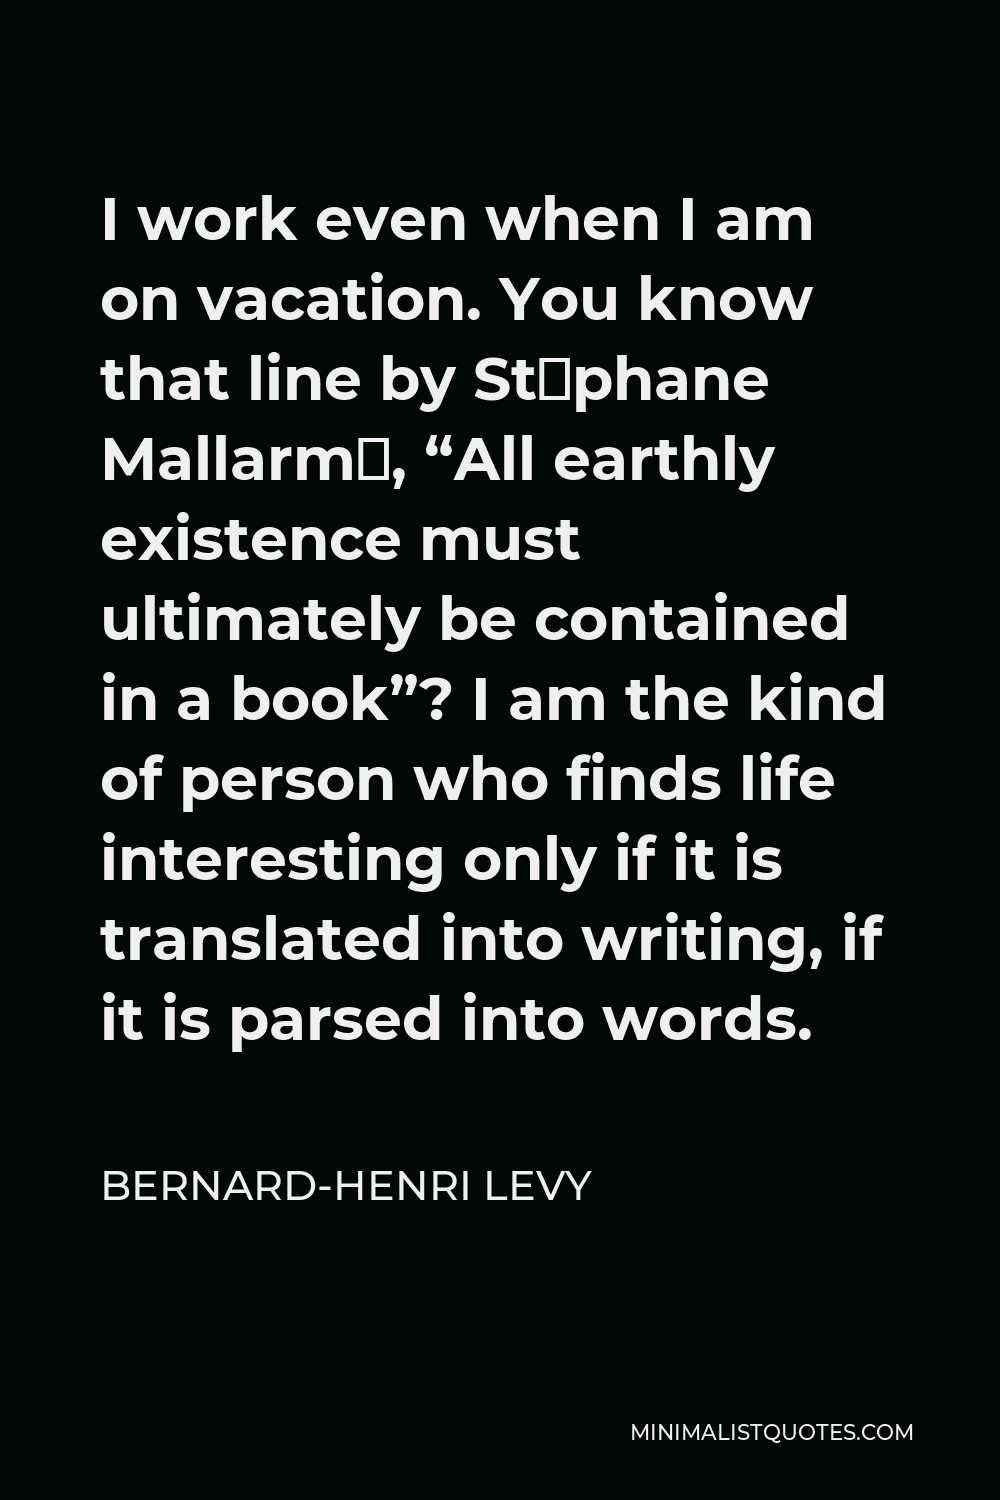 Bernard-Henri Levy Quote - I work even when I am on vacation. You know that line by Stéphane Mallarmé, “All earthly existence must ultimately be contained in a book”? I am the kind of person who finds life interesting only if it is translated into writing, if it is parsed into words.